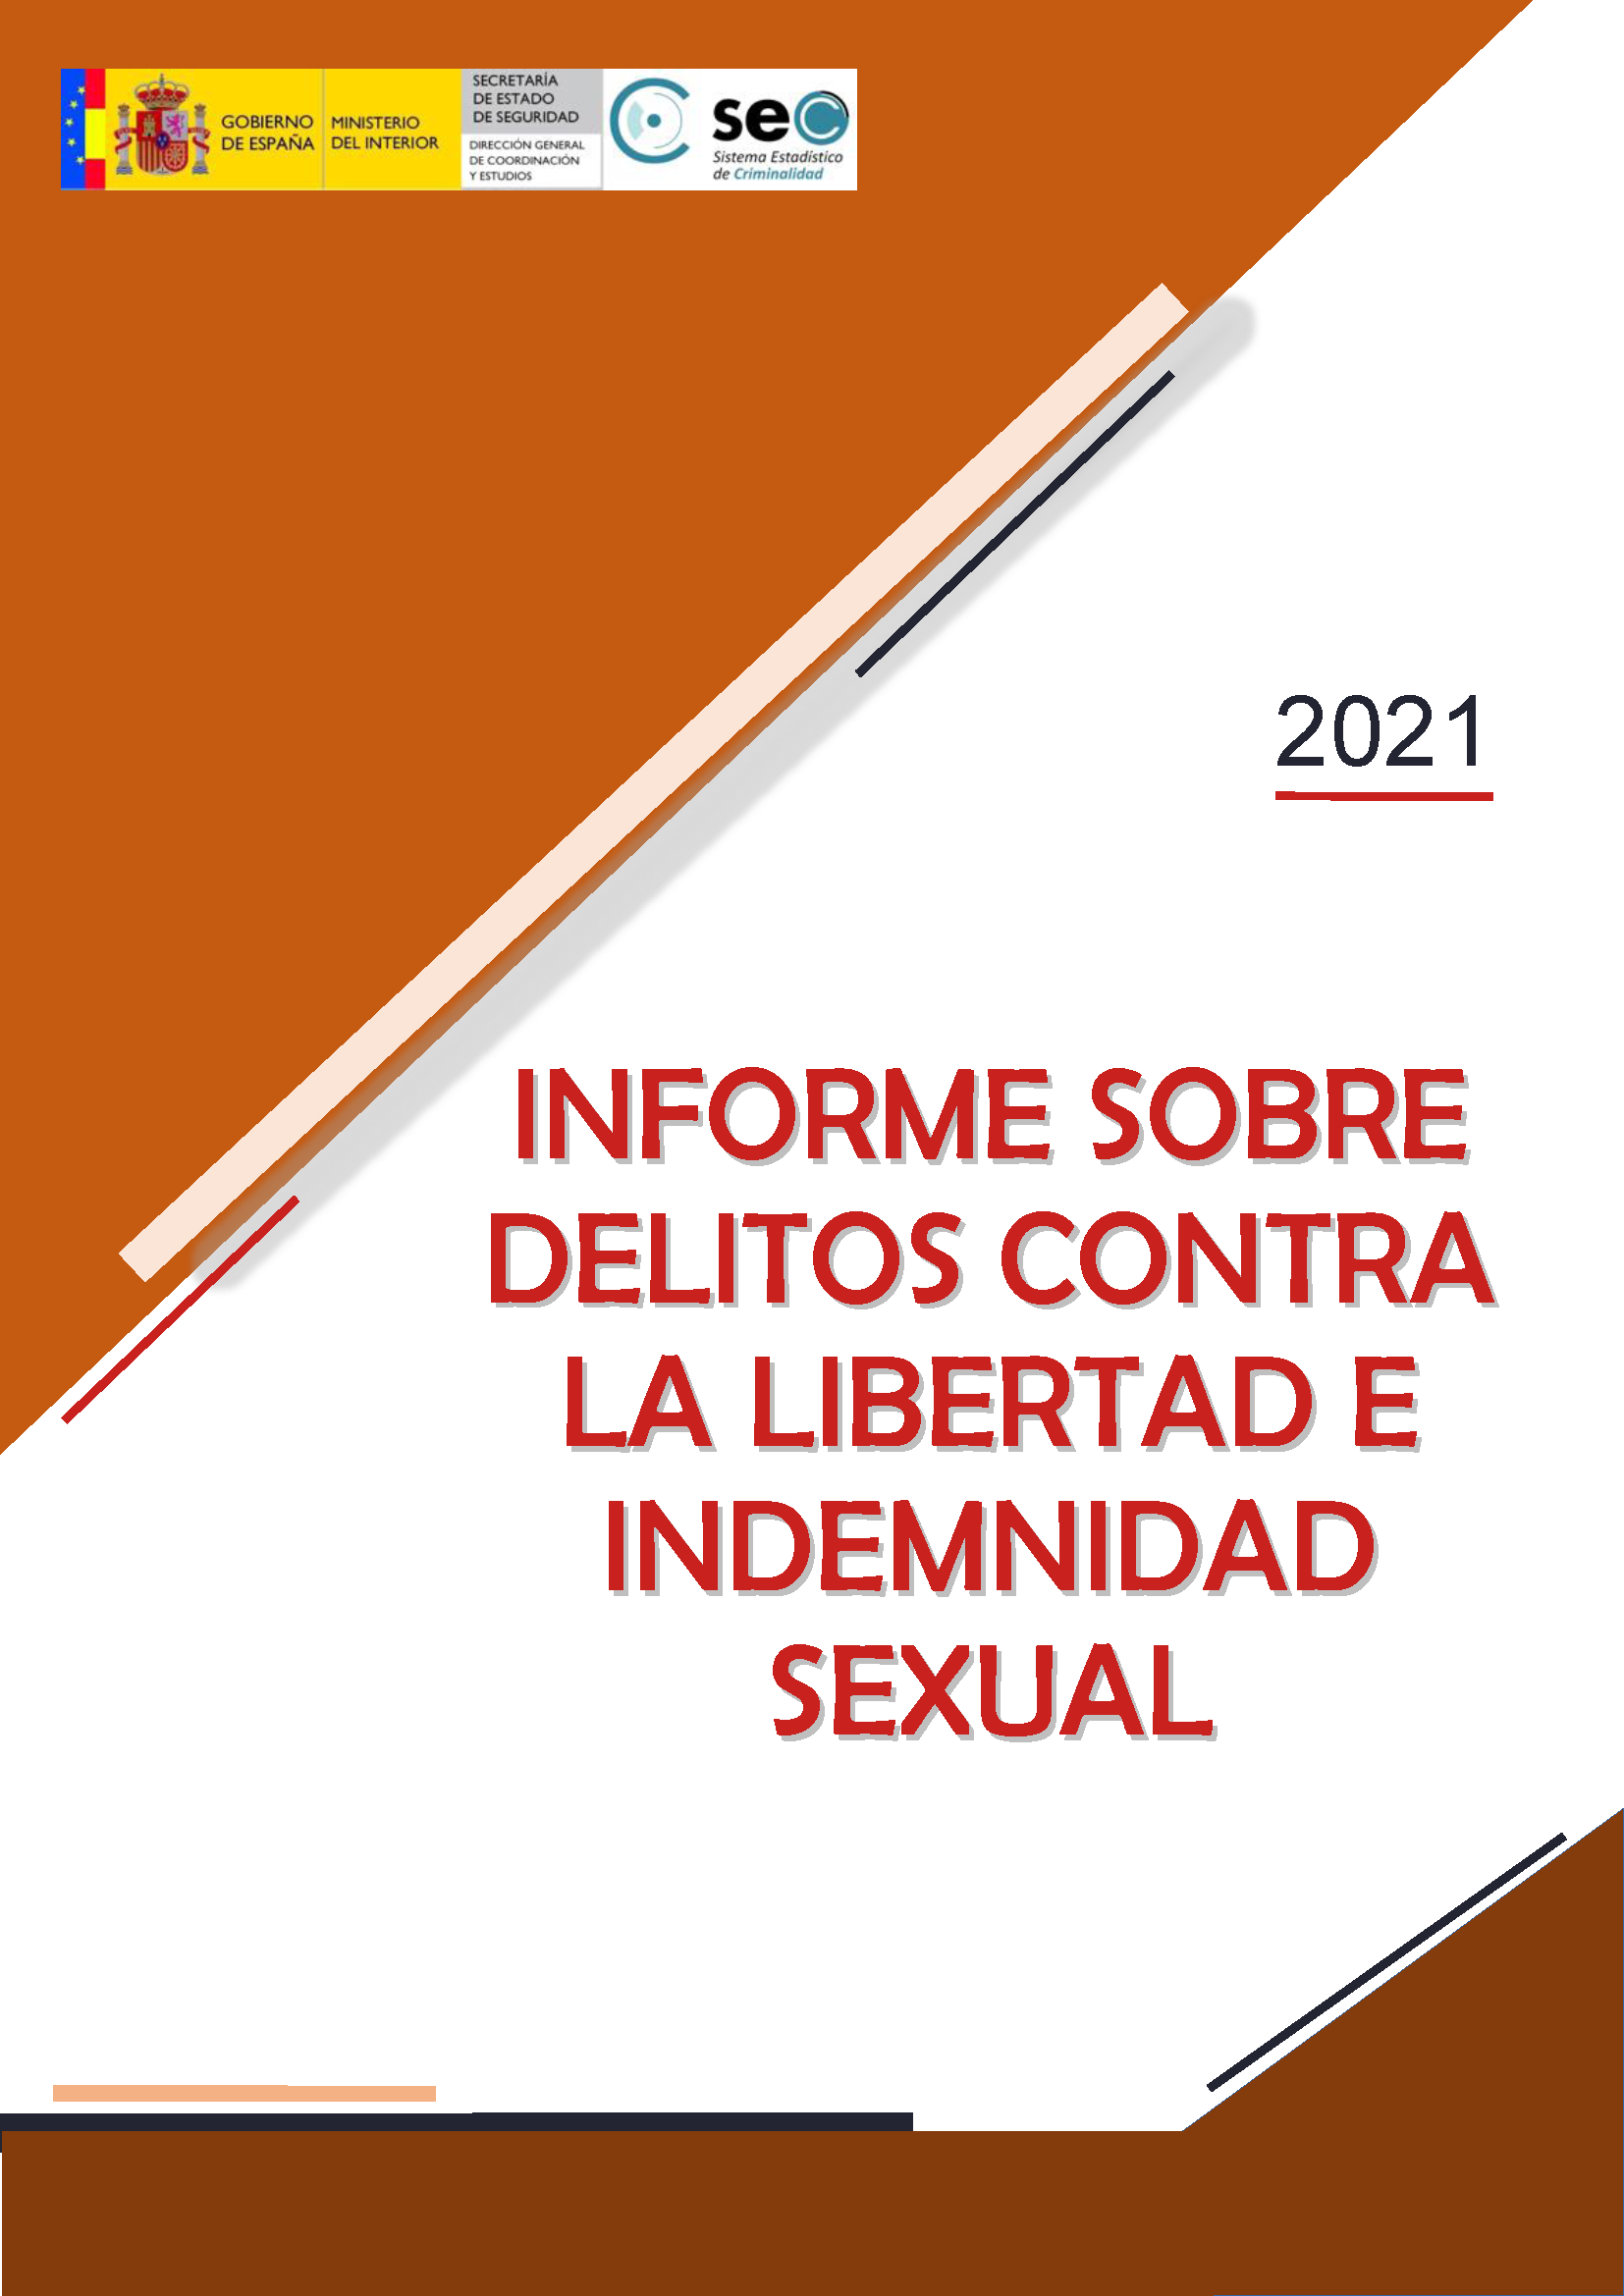 Report on crimes against sexual freedom and indemnity in Spain 2021